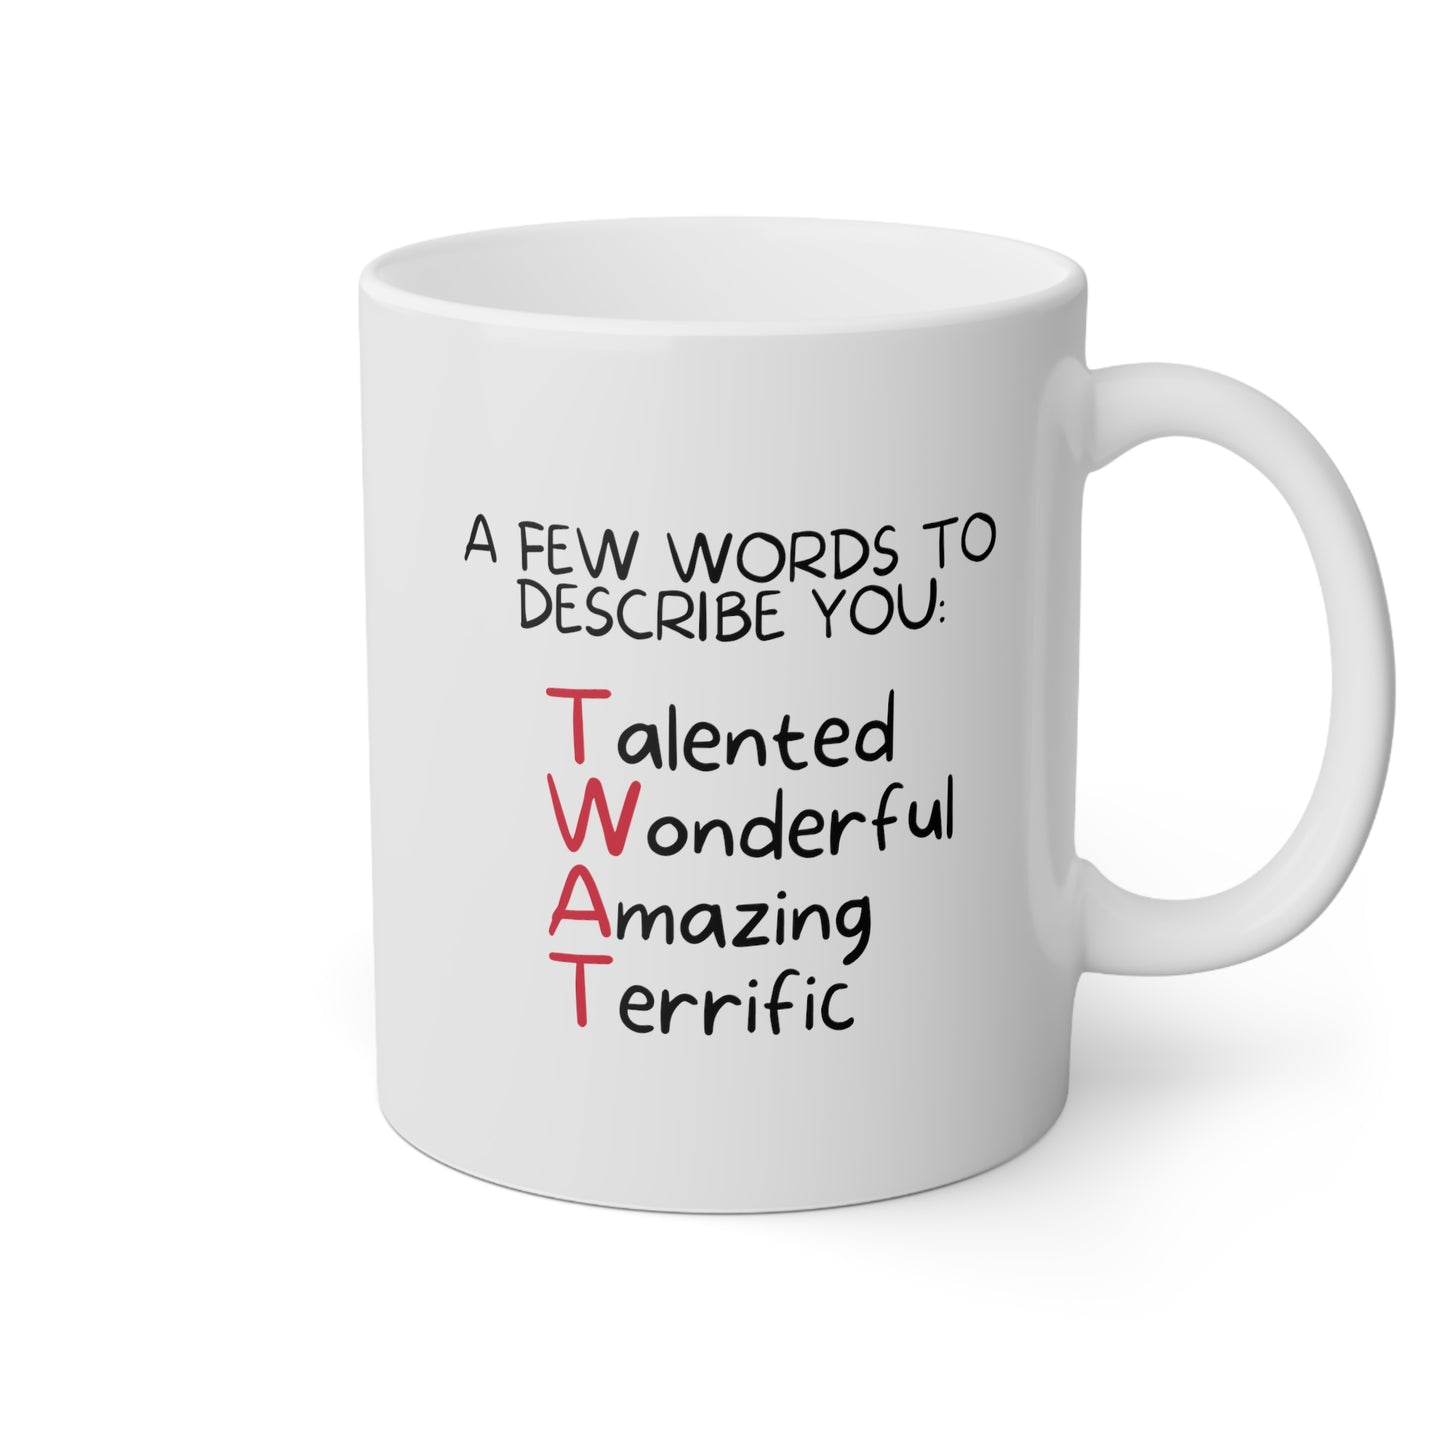 A Few Words To Describe You Talented Wonderful Amazing Terrific 11oz white funny large coffee mug gift for coworker sarcastic office rude boss work waveywares wavey wares wavywares wavy wares